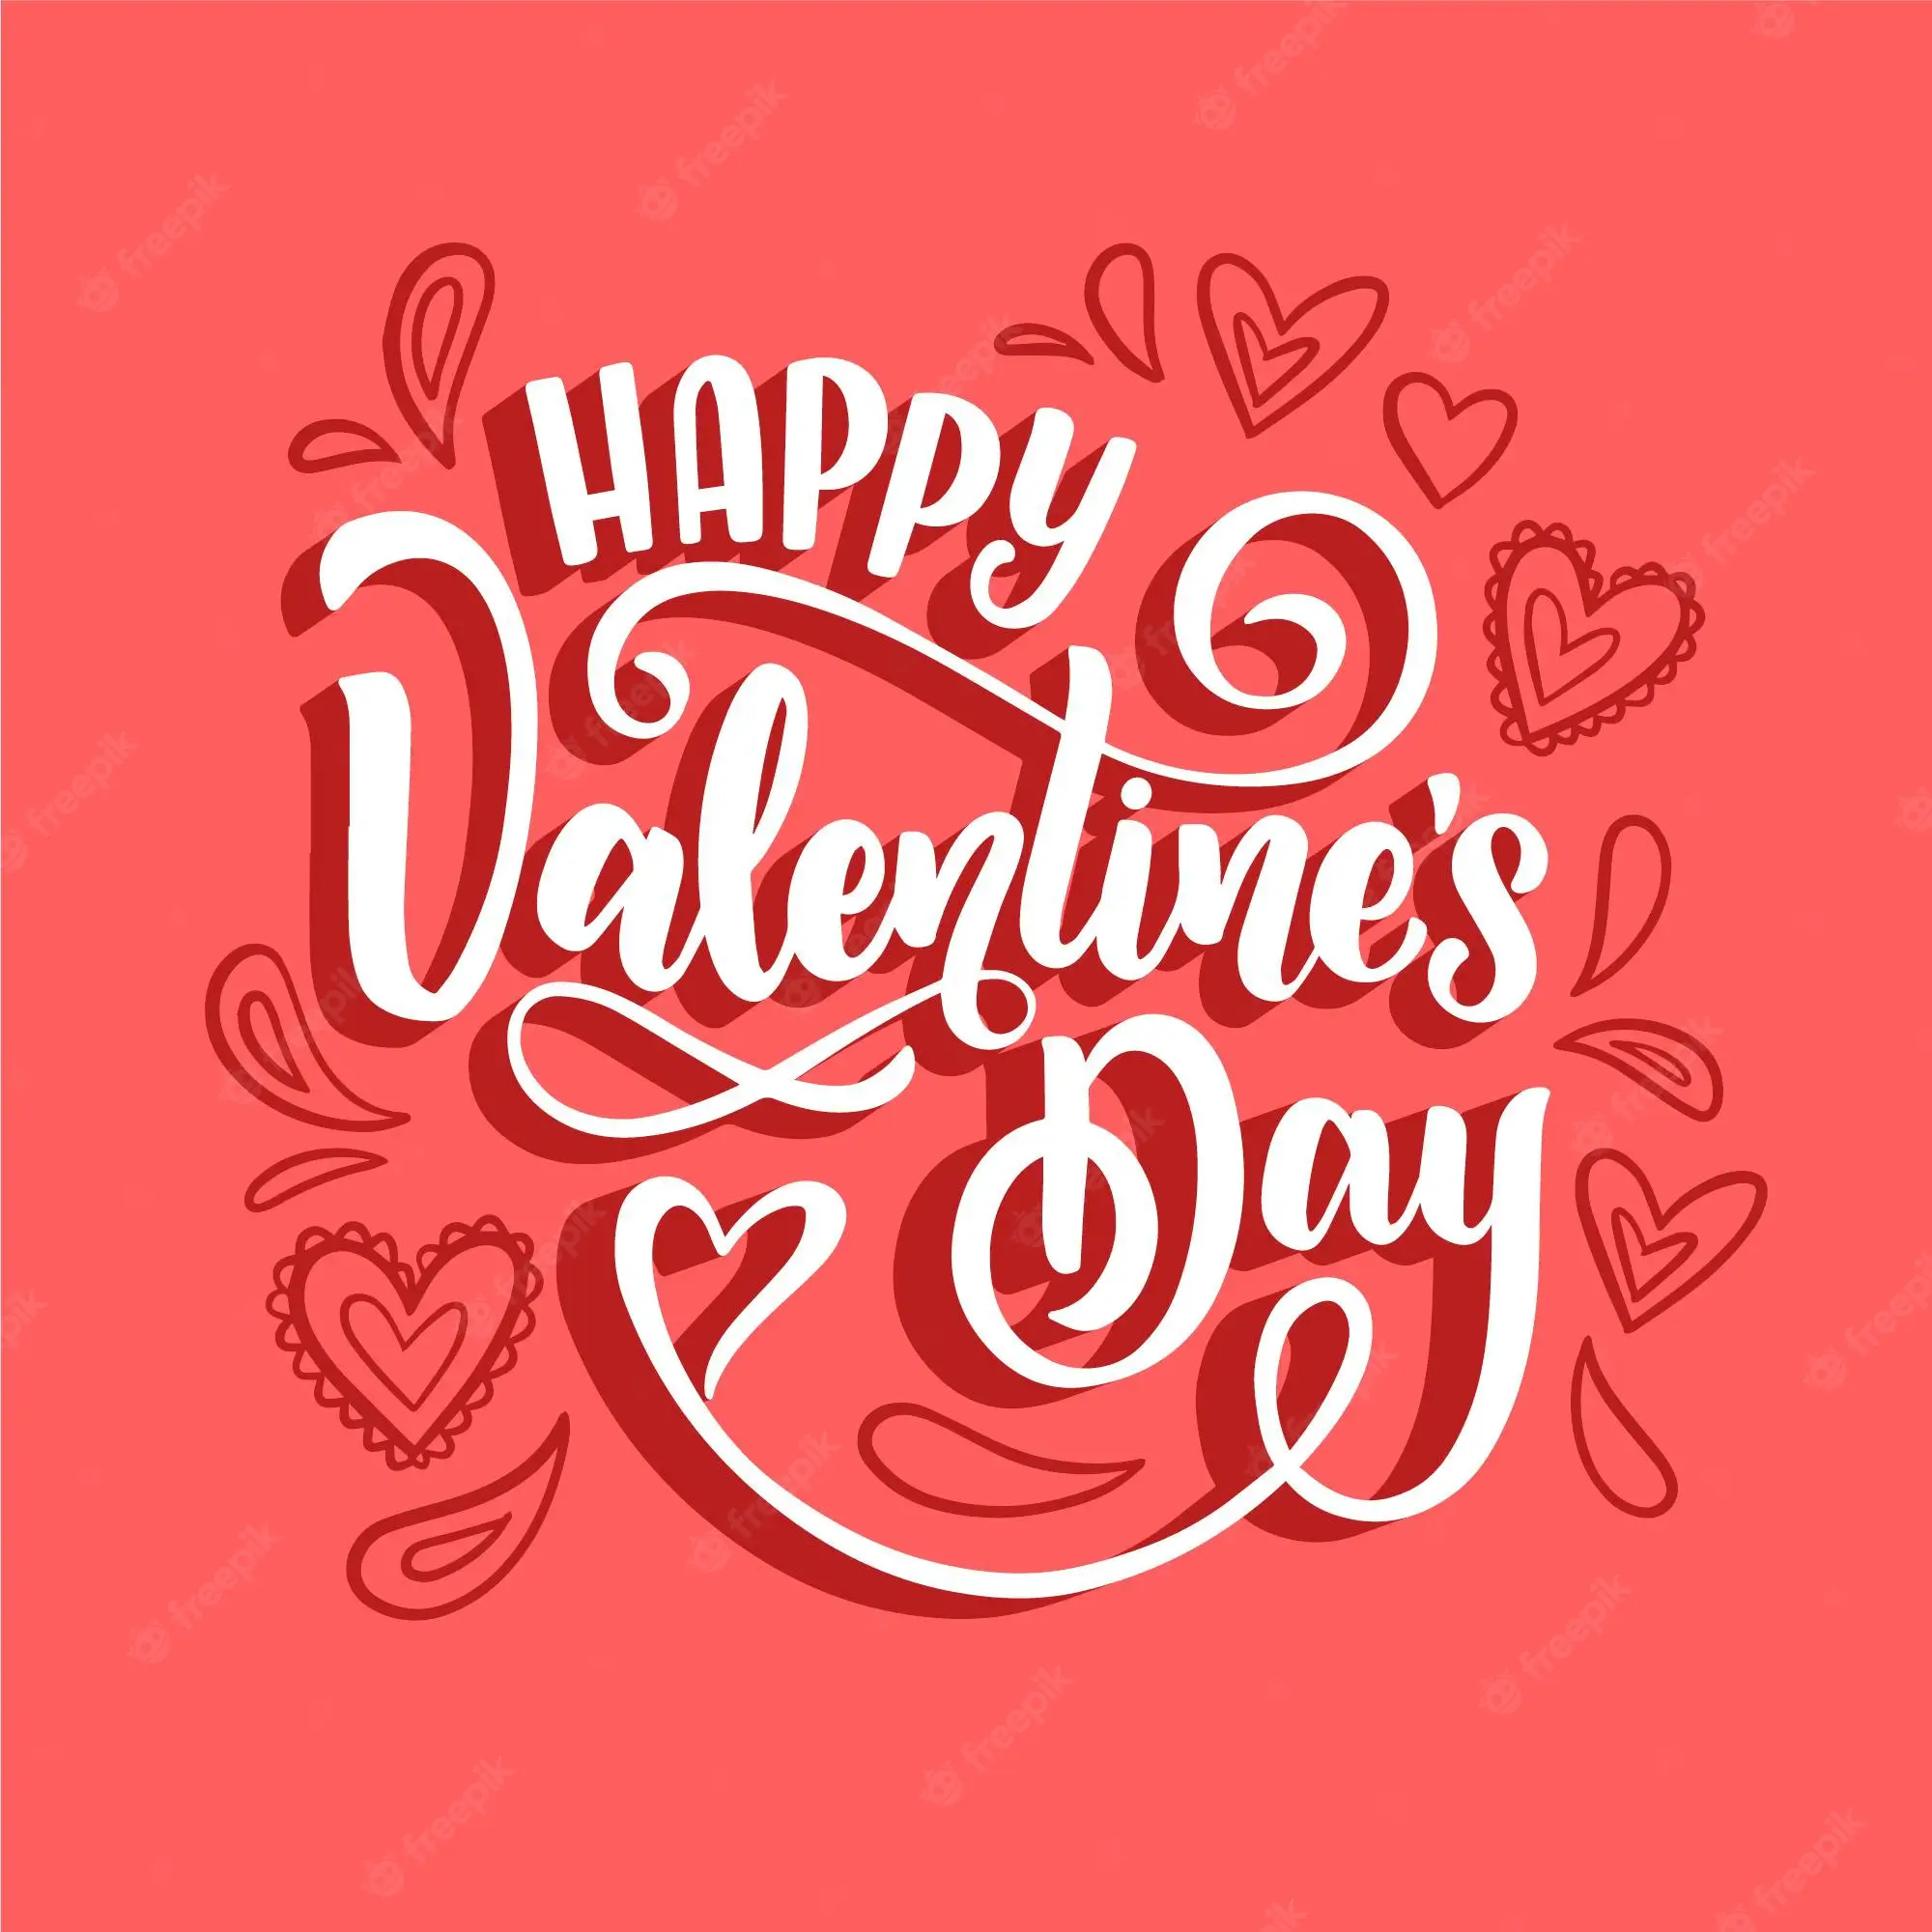 Valentines Day Images Free Dowload